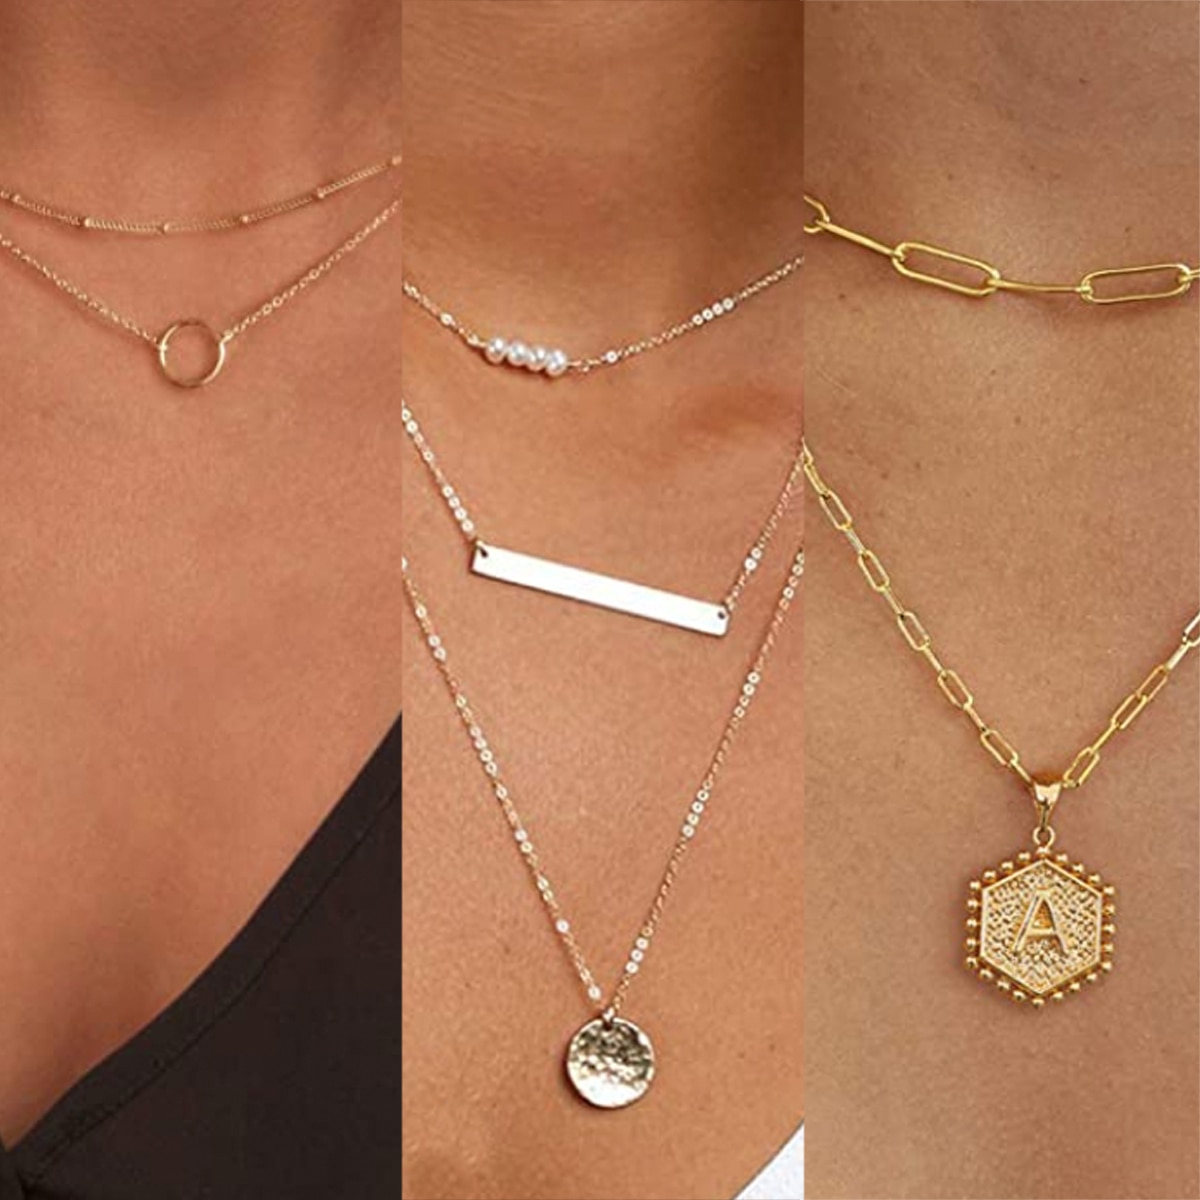 Necklace NO COLLECTION white Women Jewelry & Watches No Collection Women Costume Jewelry No Collection Women Necklaces & Pendants No Collection Women Necklaces No Collection Women Necklaces No Collection Women 